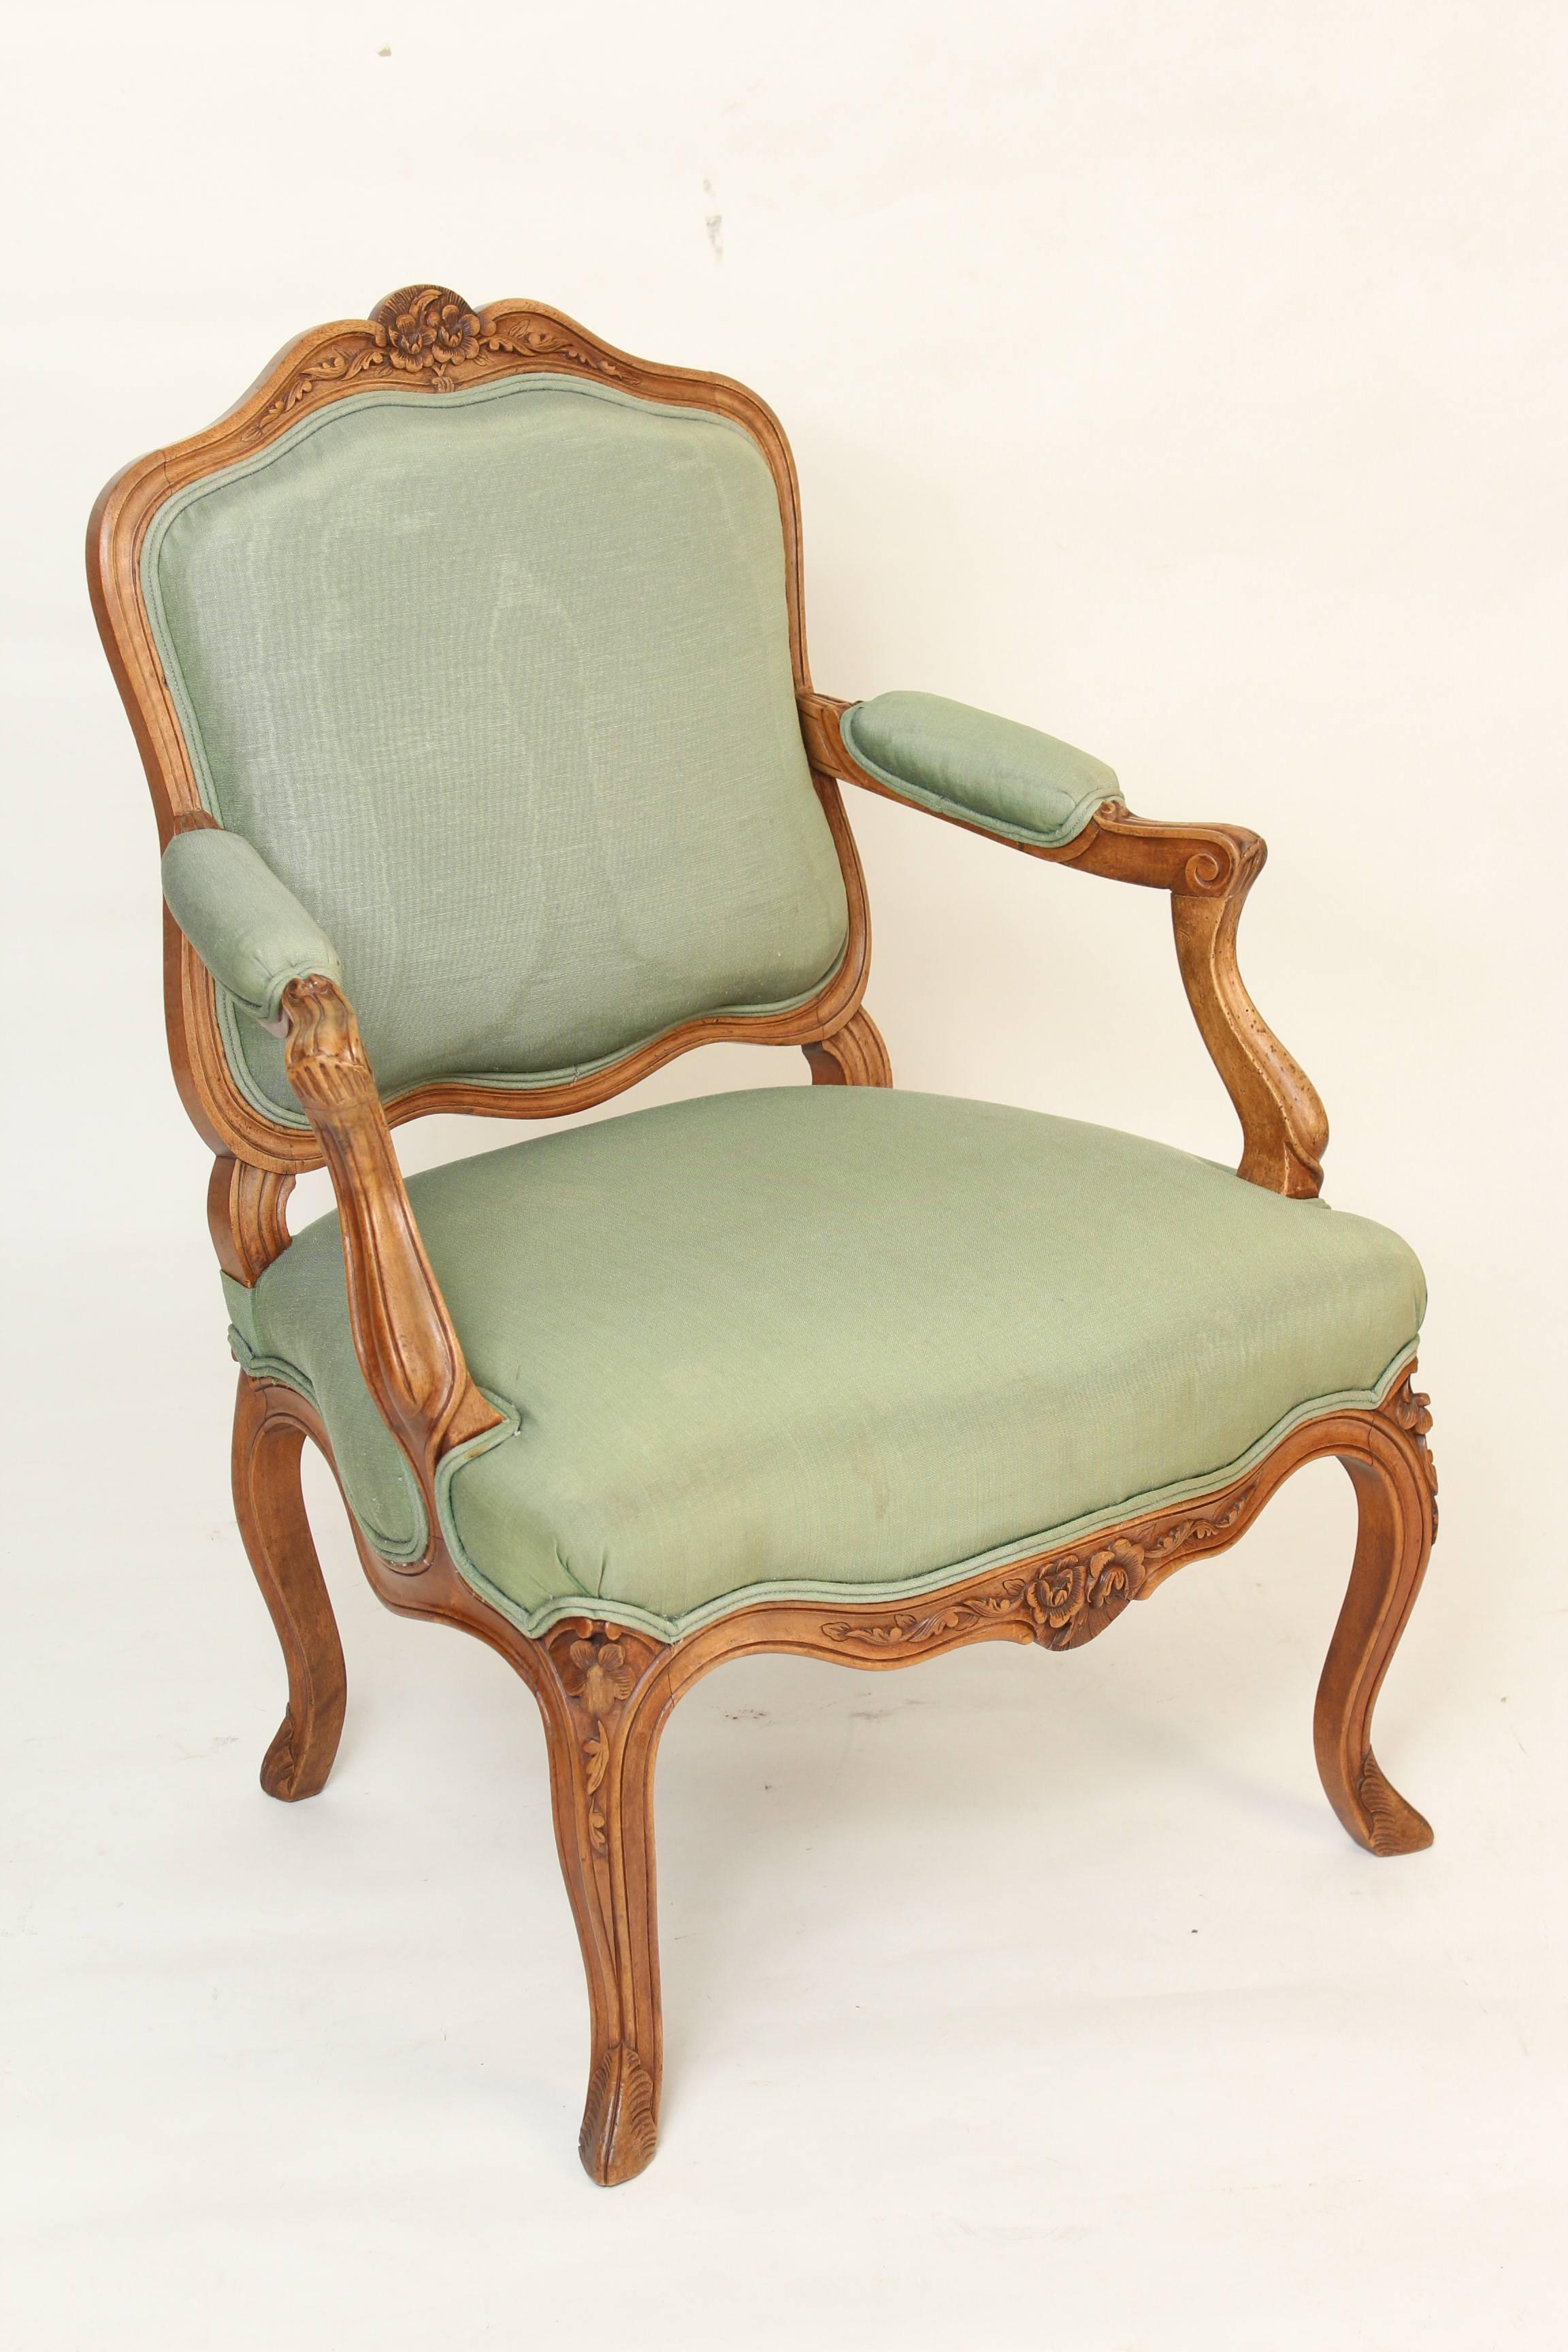 Pair of Louis XV style carved beech wood armchairs, circa 1920.